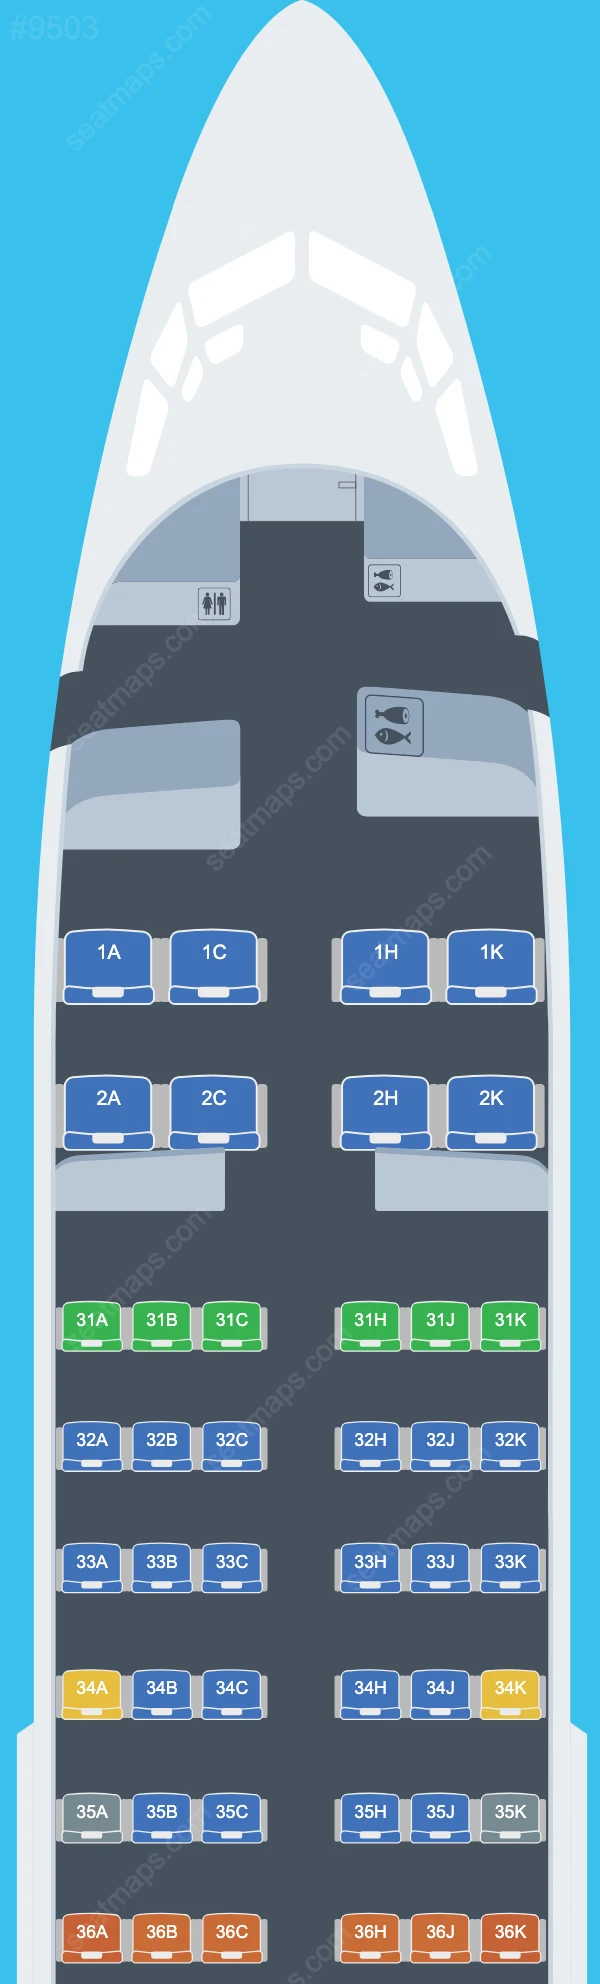 China Southern Boeing 737 Seat Maps 737-700 V.5